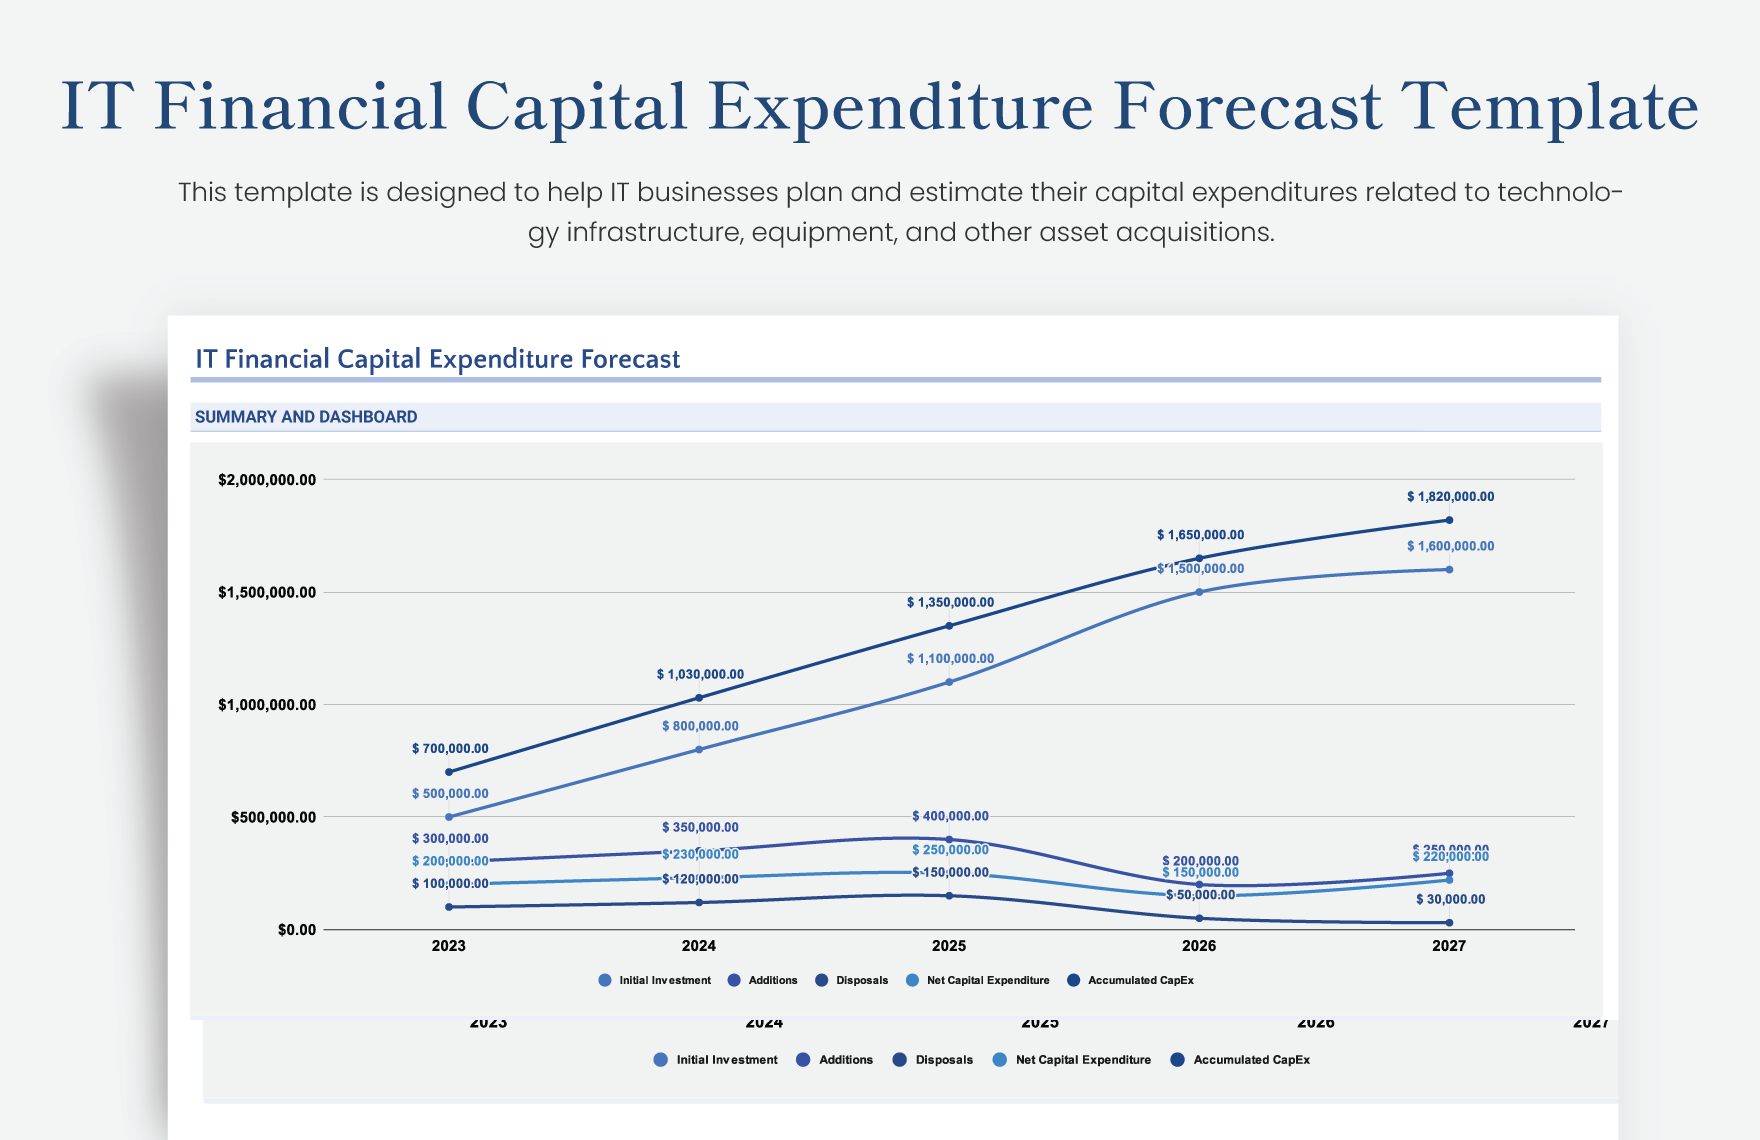 IT Financial Capital Expenditure Forecast Template